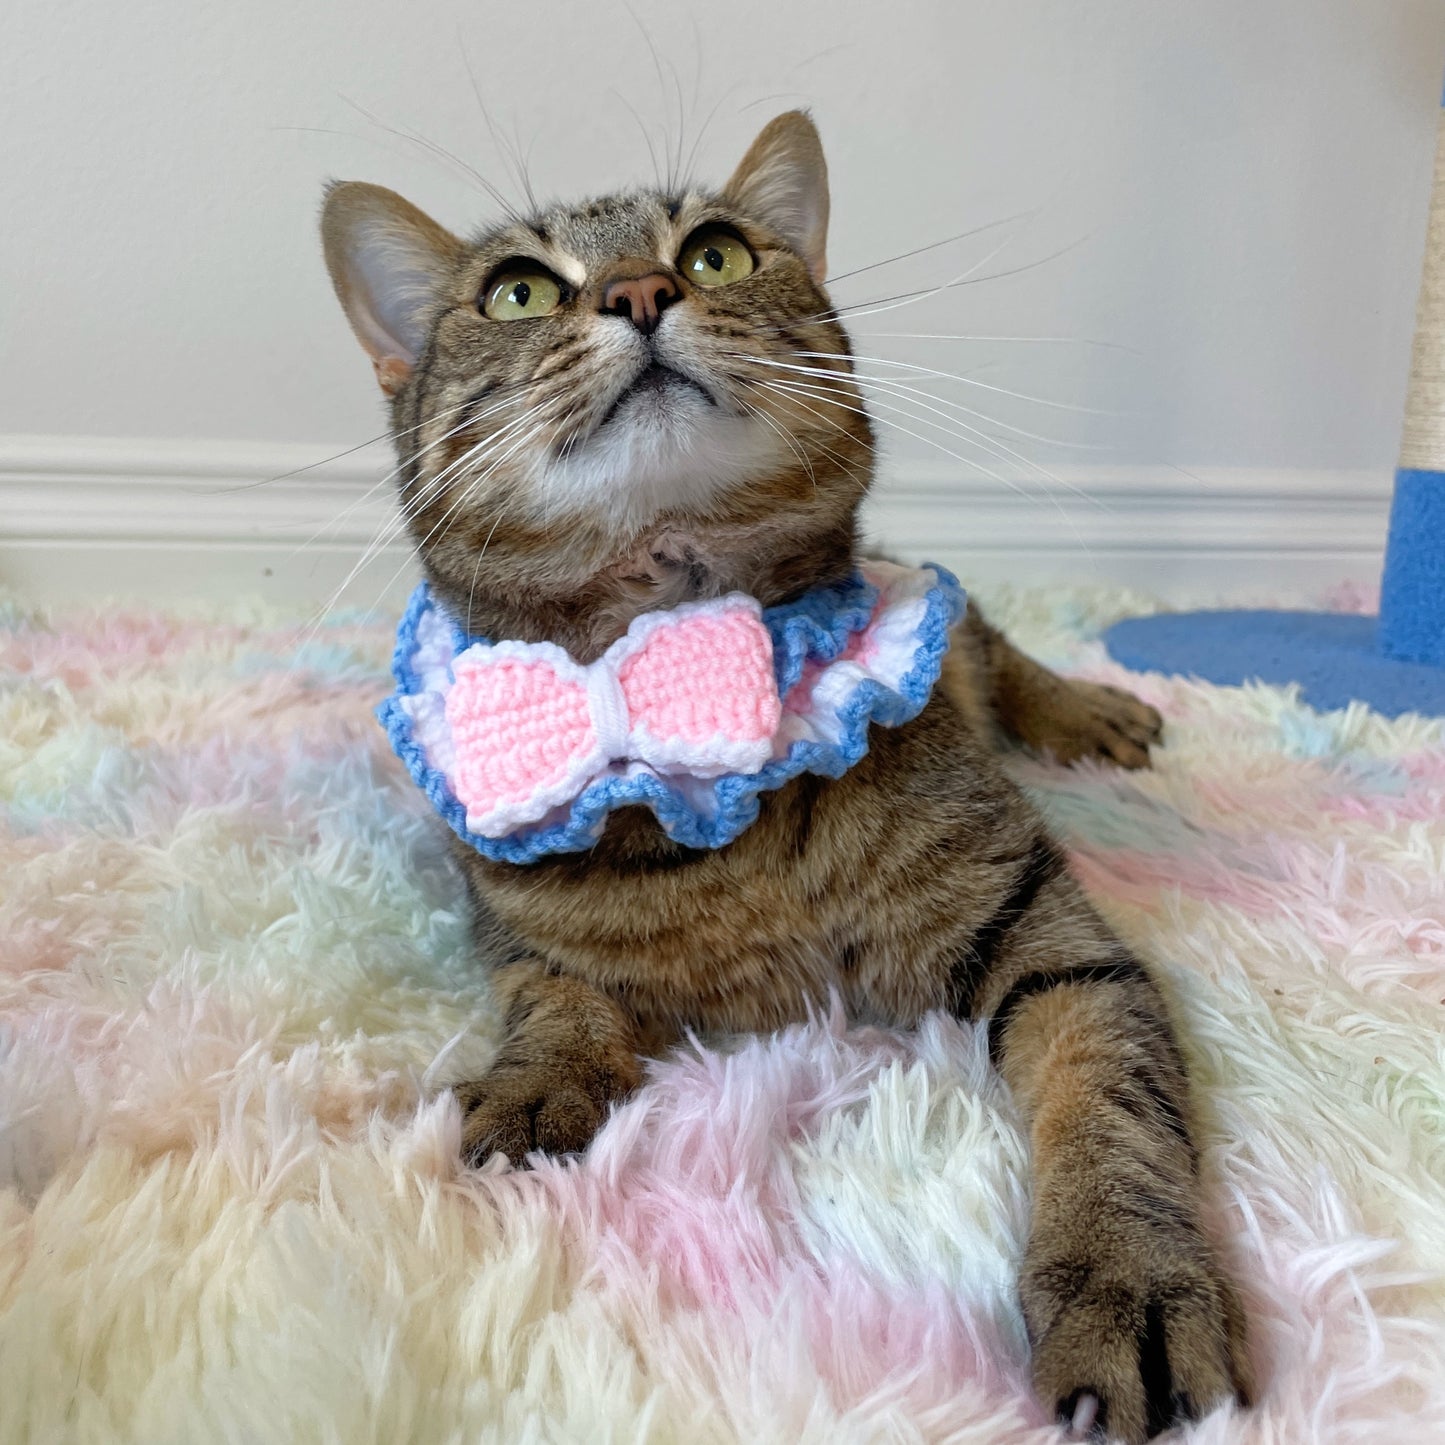 Pink Bow Tie Knit Handmade Crochet Pet Bib Accessory Collar for Cats and Dogs - Lil Wild Pets